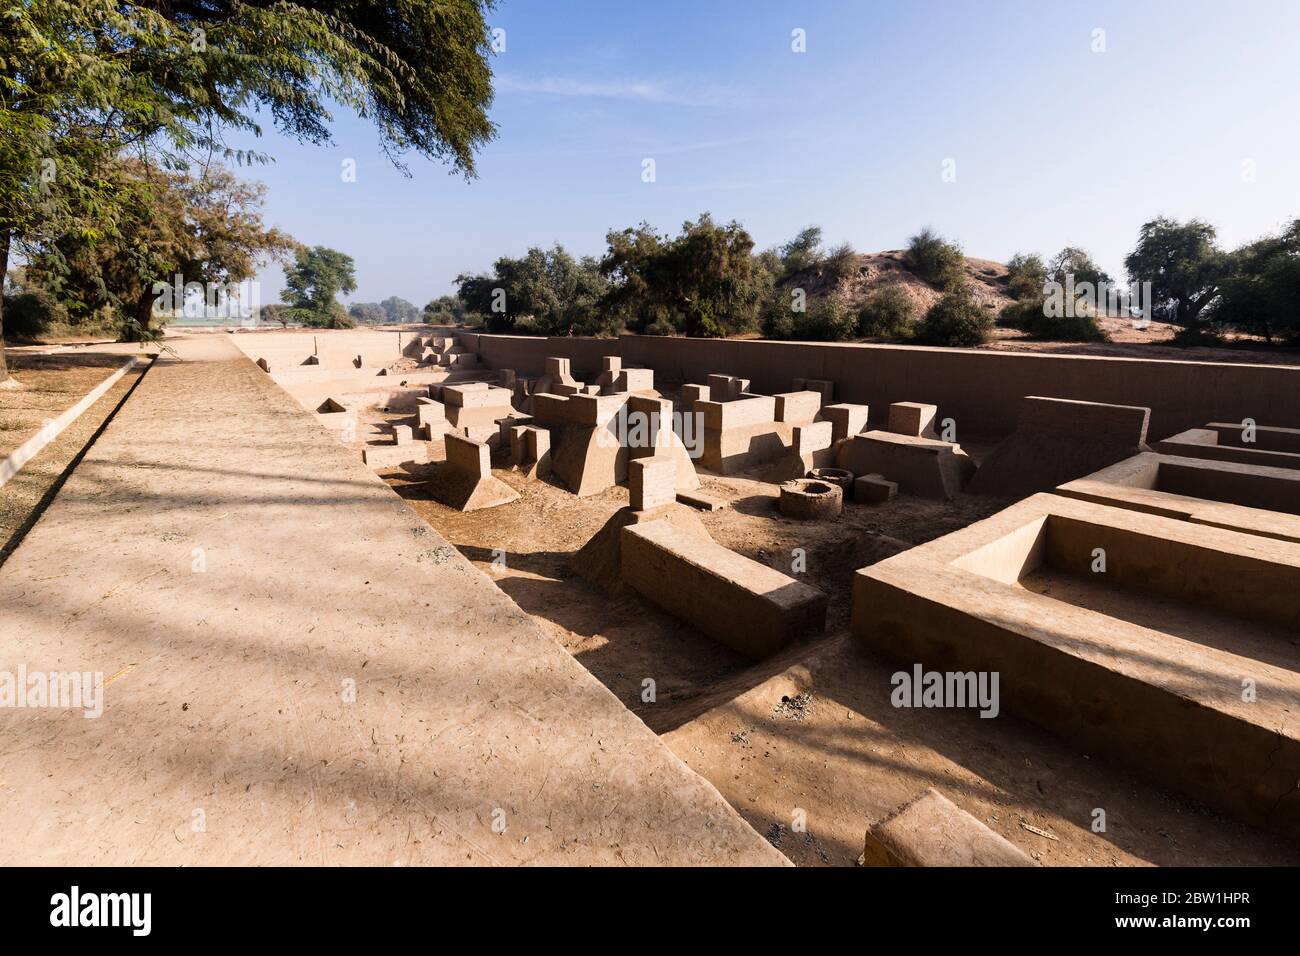 Archaeological site of Harappa, Harappan Civilisation, Indus Valley Civilisation, Sahiwal District, Punjab Province, Pakistan, South Asia, Asia Stock Photo